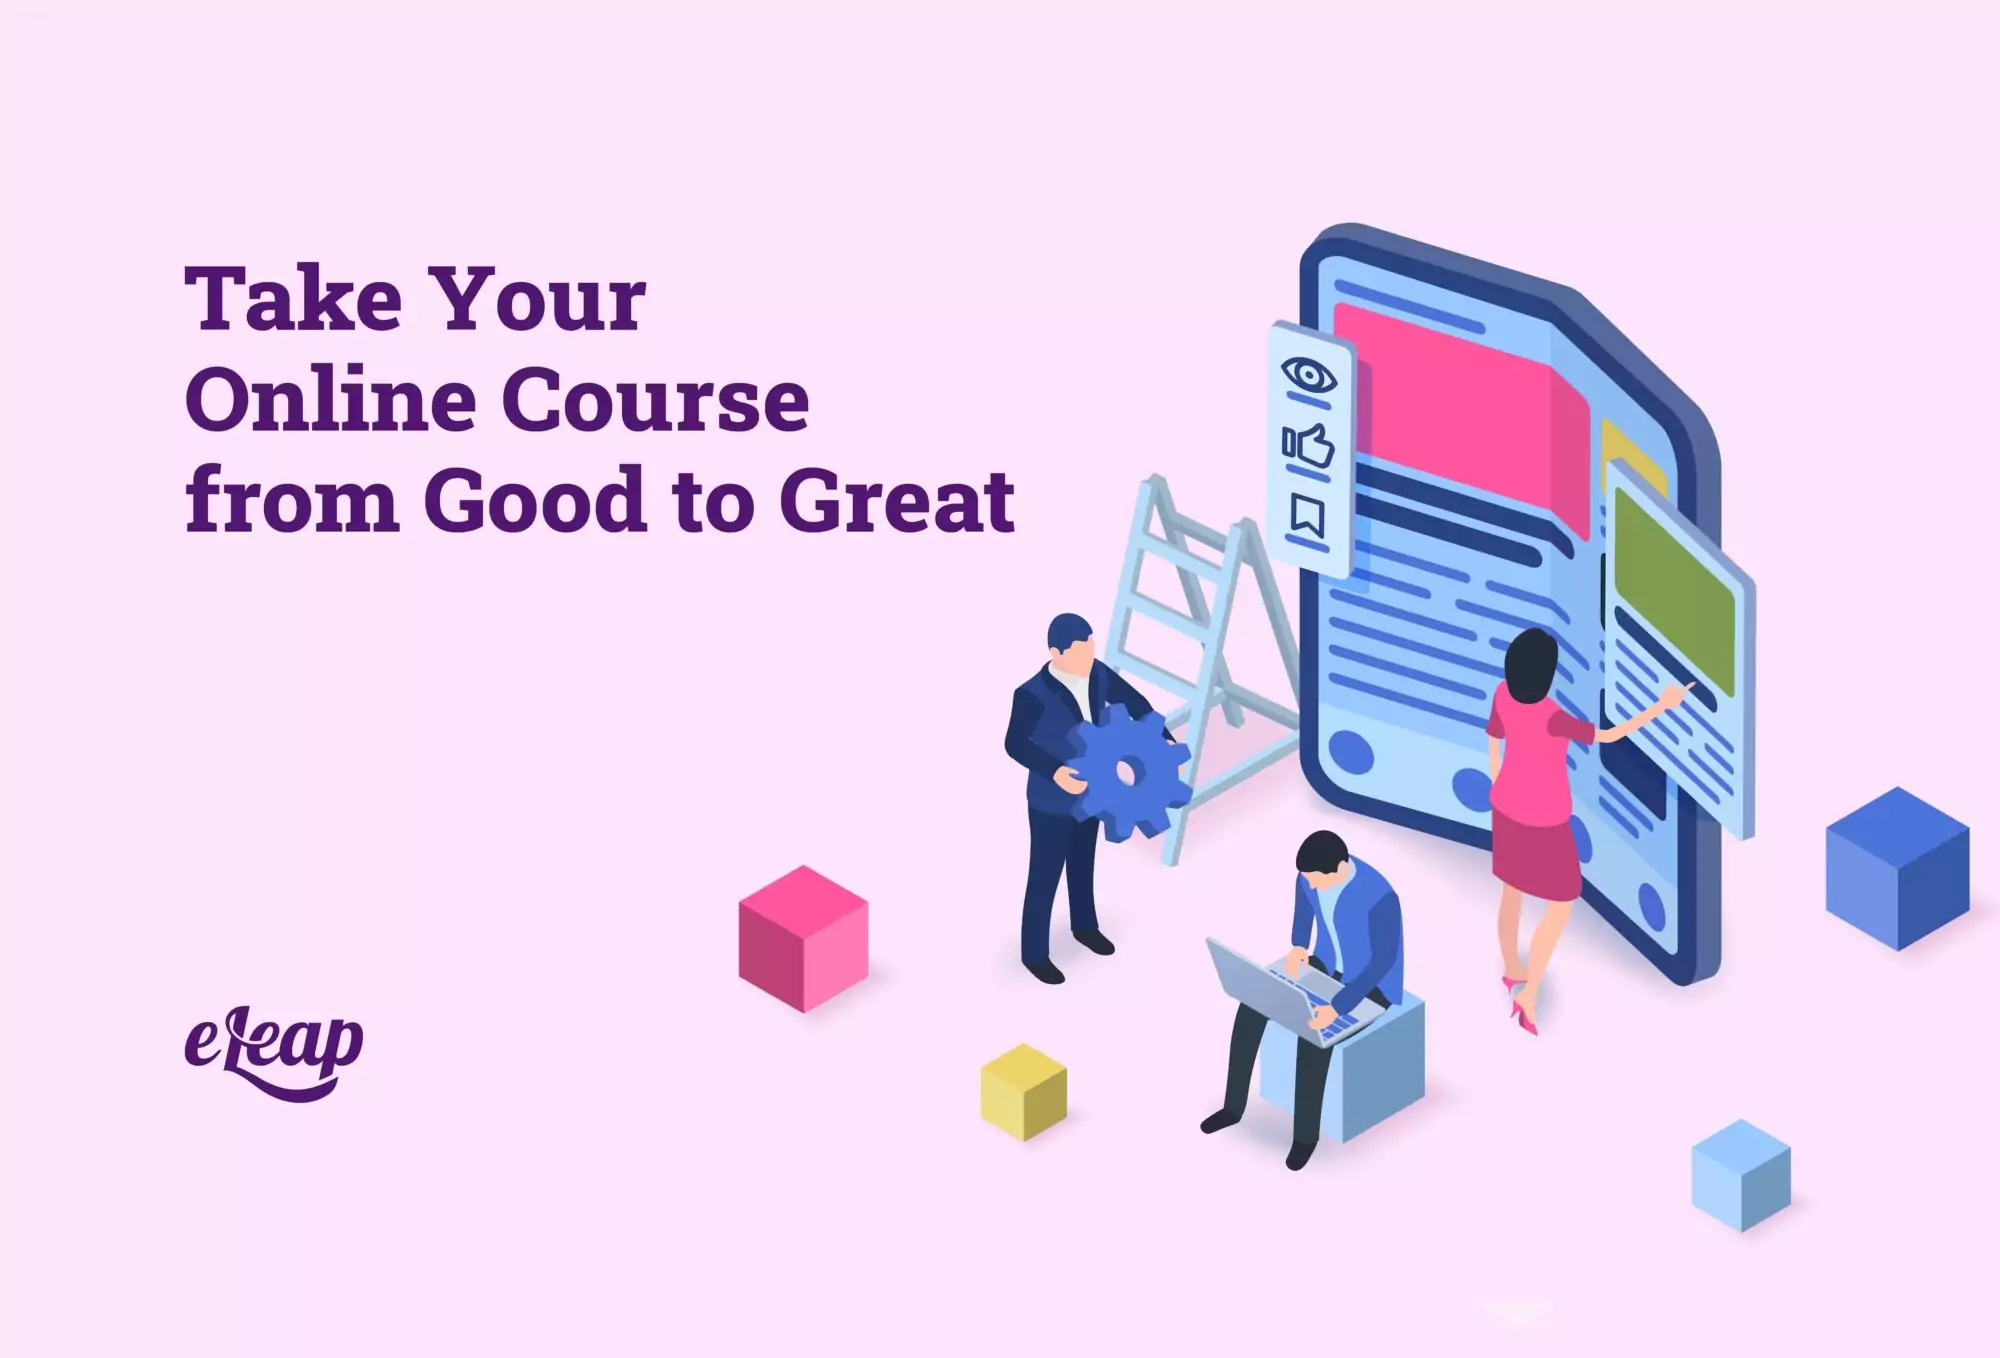 Take Your Online Course from Good to Great